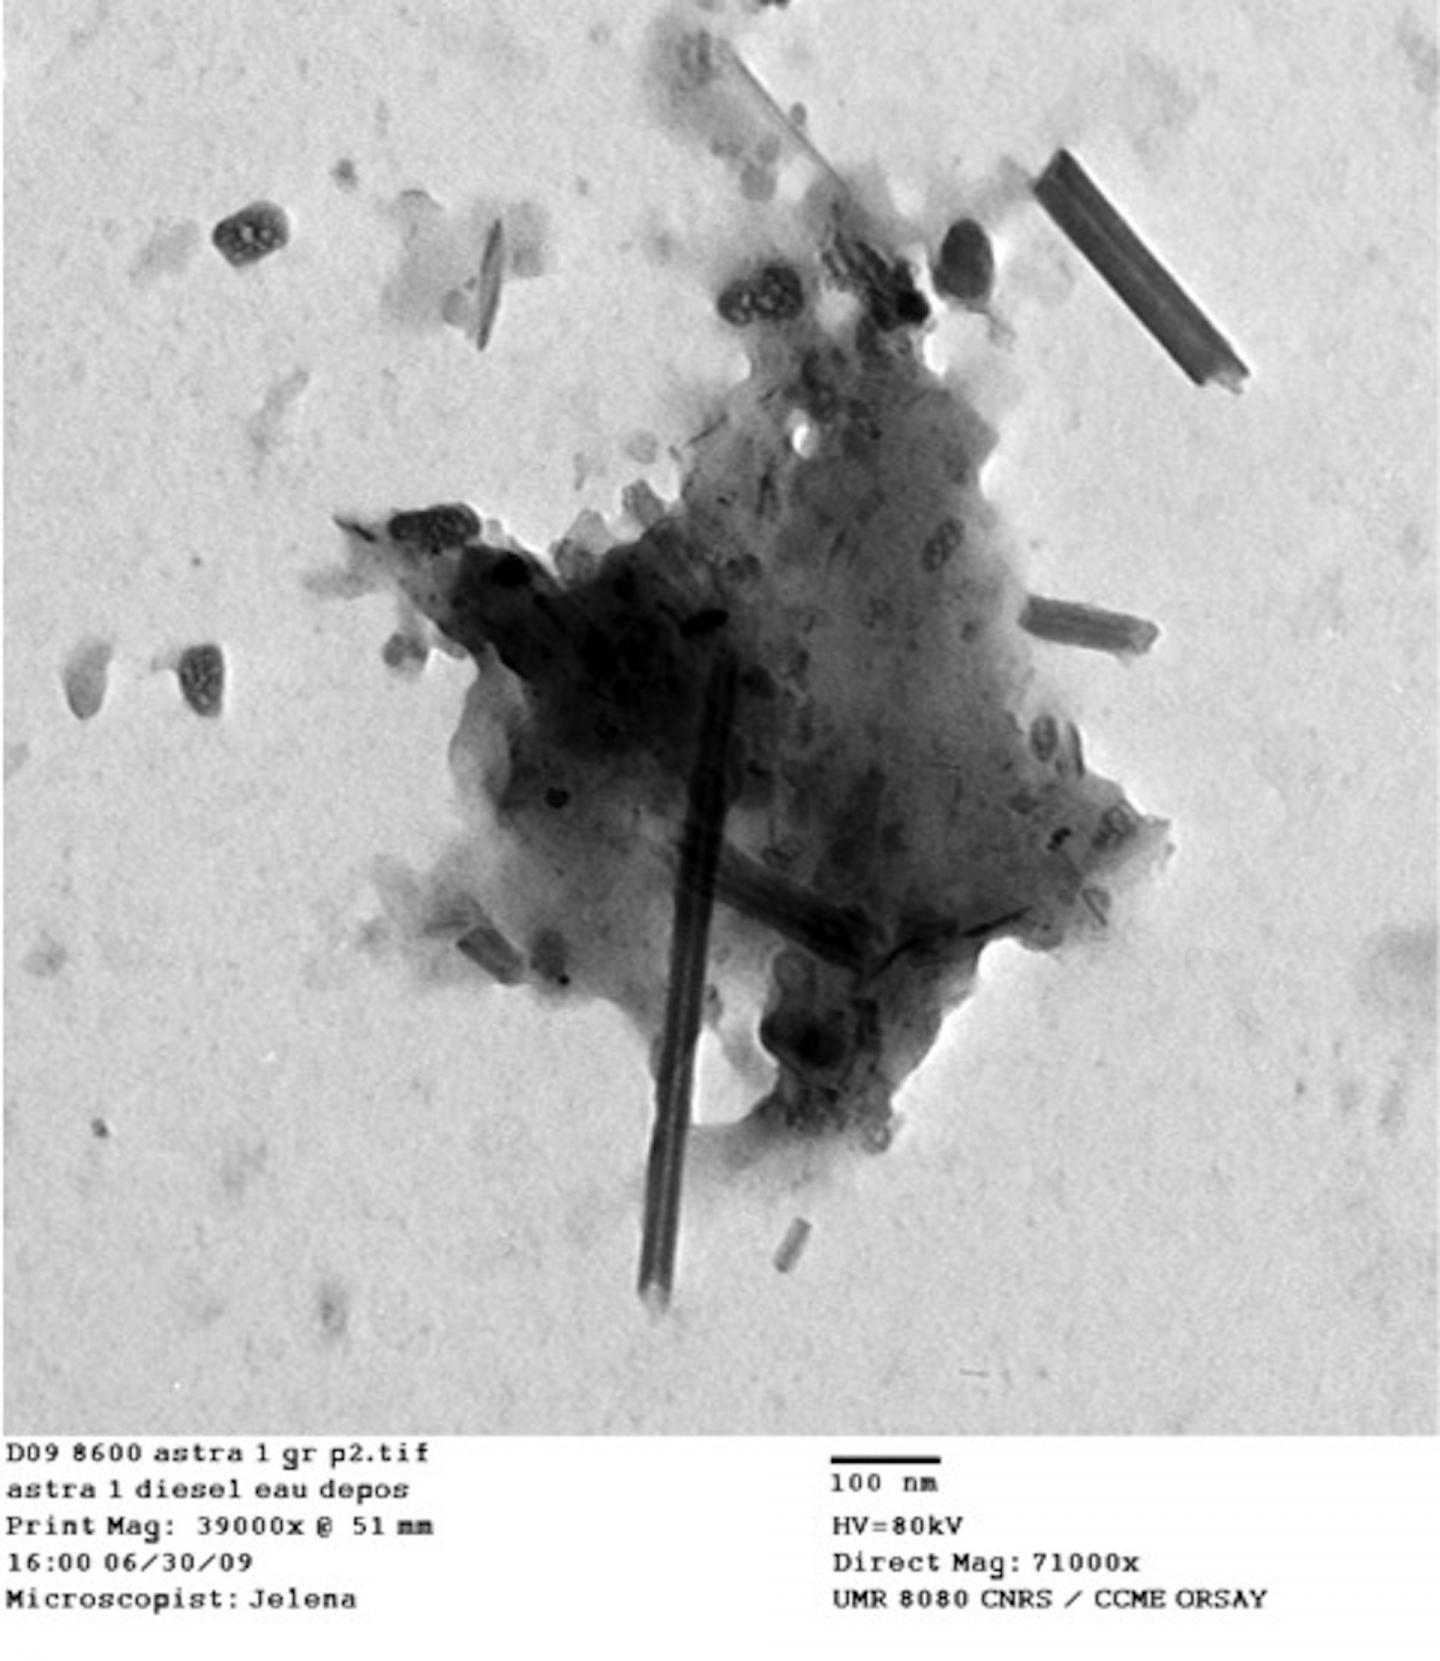  Caption: Carbon nanotubes (the long rods) and nanoparticles (the black clumps) appear in vehicle exhaust taken from the tailpipes of cars in Paris. The image is part of a study by scientists in Paris and at Rice University to analyze carbonaceous material in the lungs of asthma patients. They found that cars are a likely source of nanotubes found in the patients. Credit: Courtesy of Fathi Moussa/Paris-Saclay University